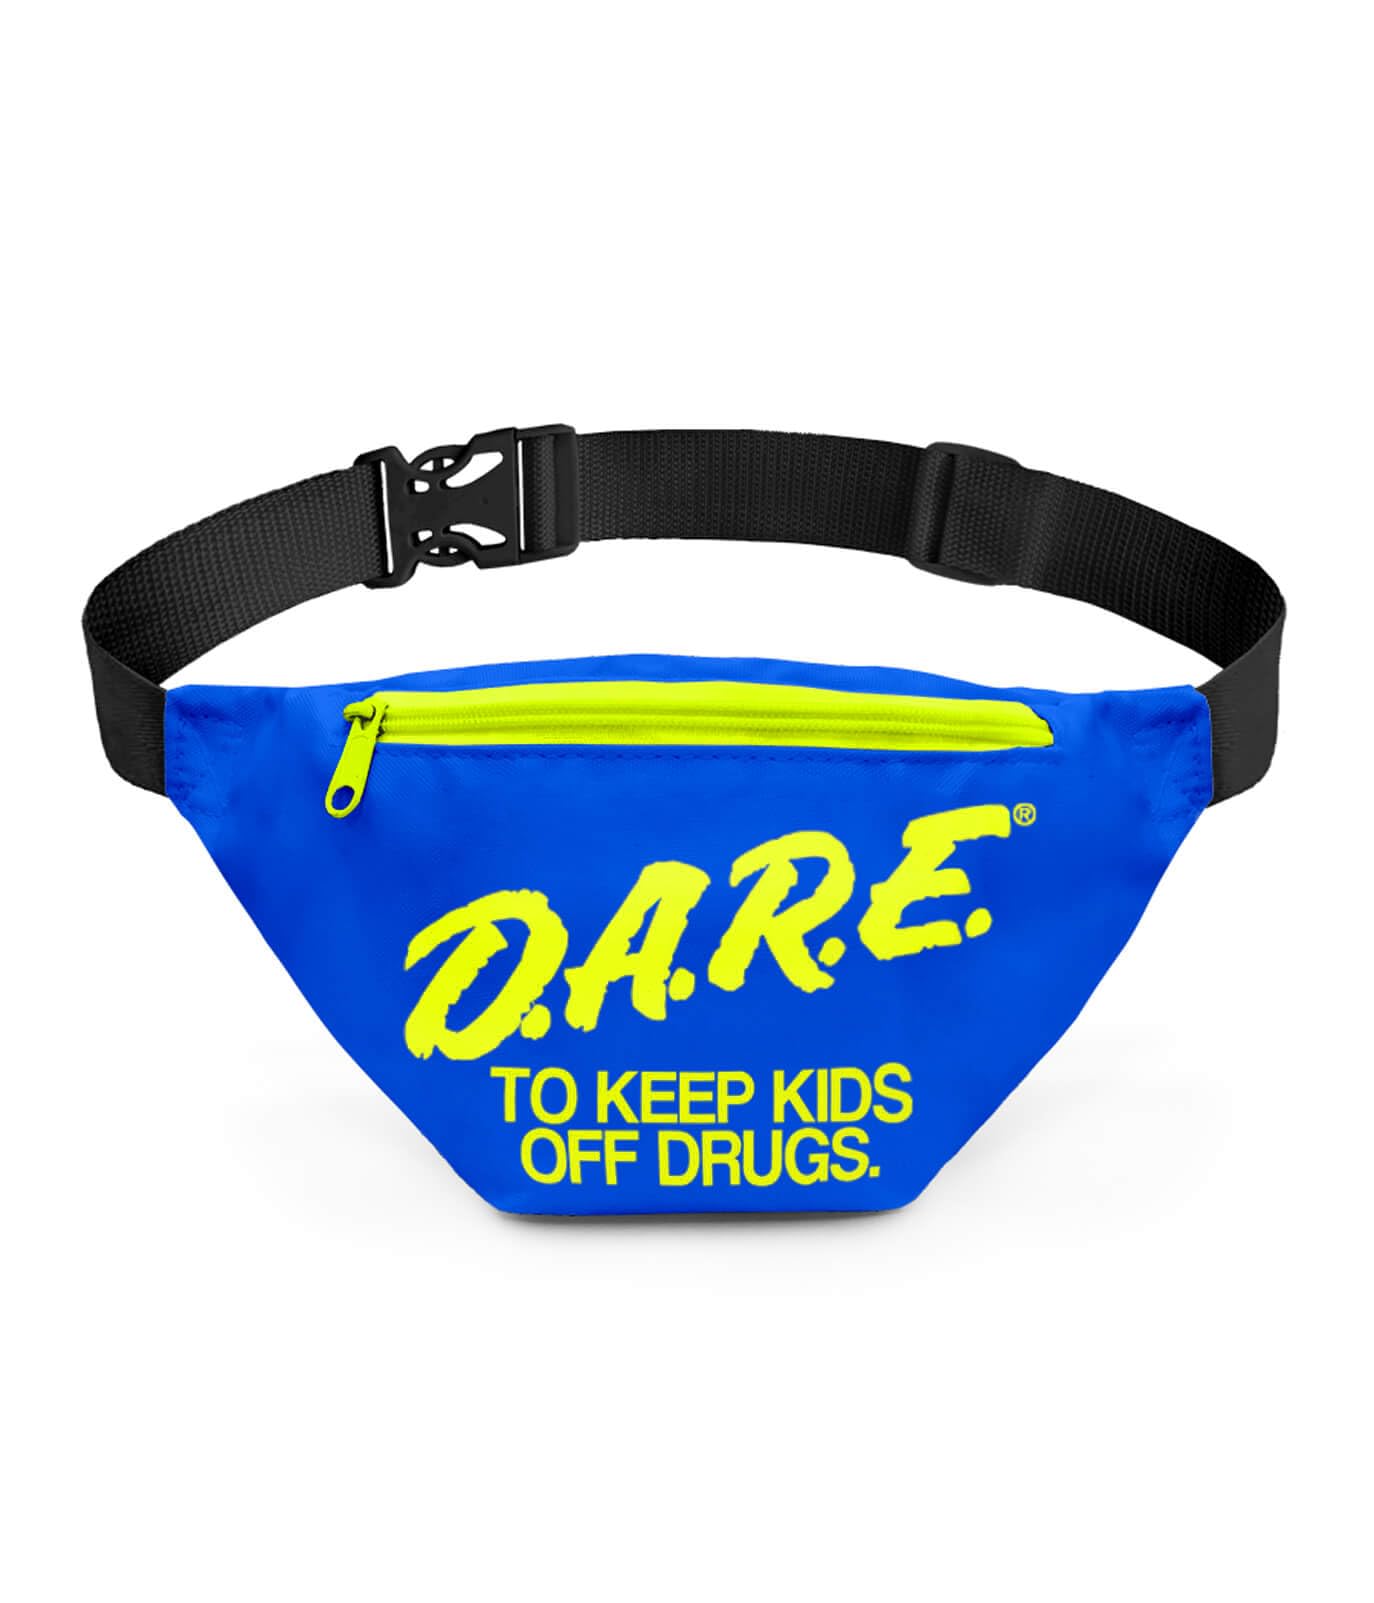 Neon Retro DARE Fanny Pack Waist Bags with Adjustable Waist Straps (Neon Blue)